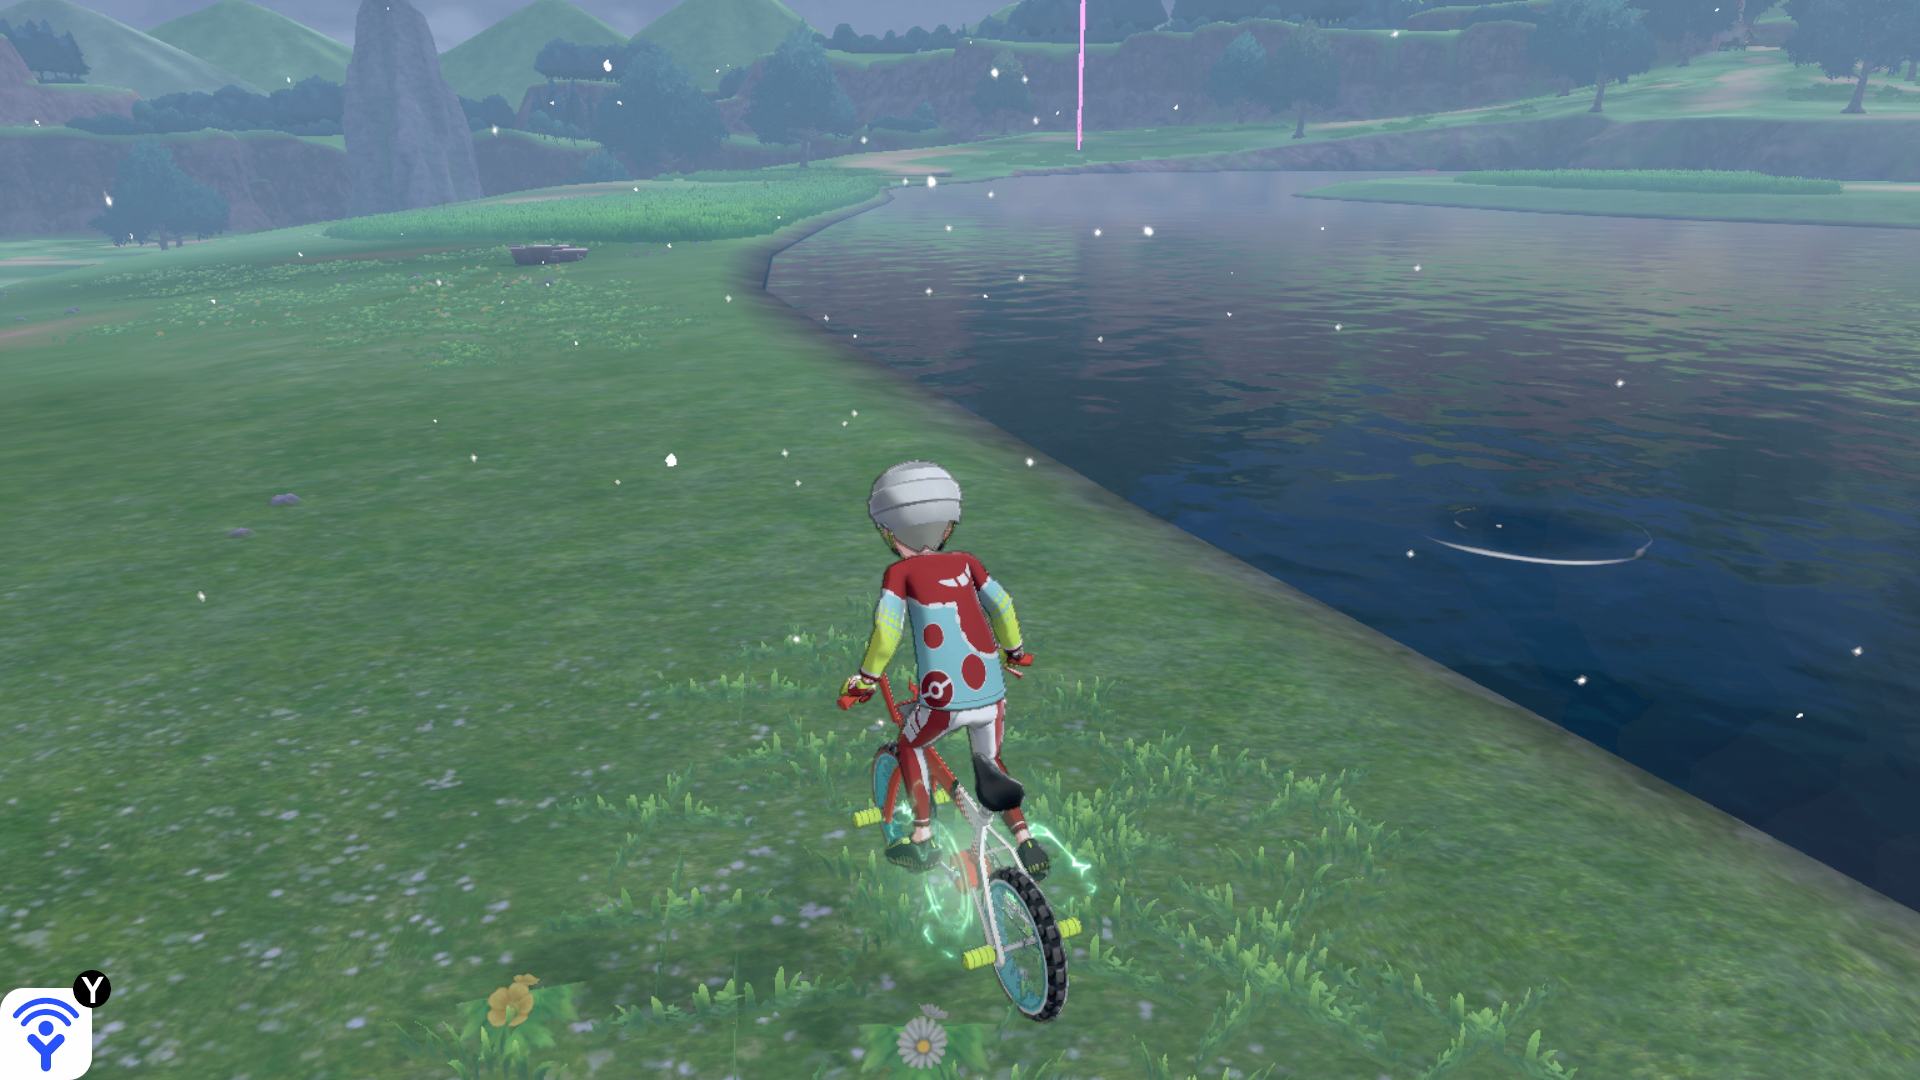 How To Increase The Speed Of The Rotom Bike In Pokémon Sword